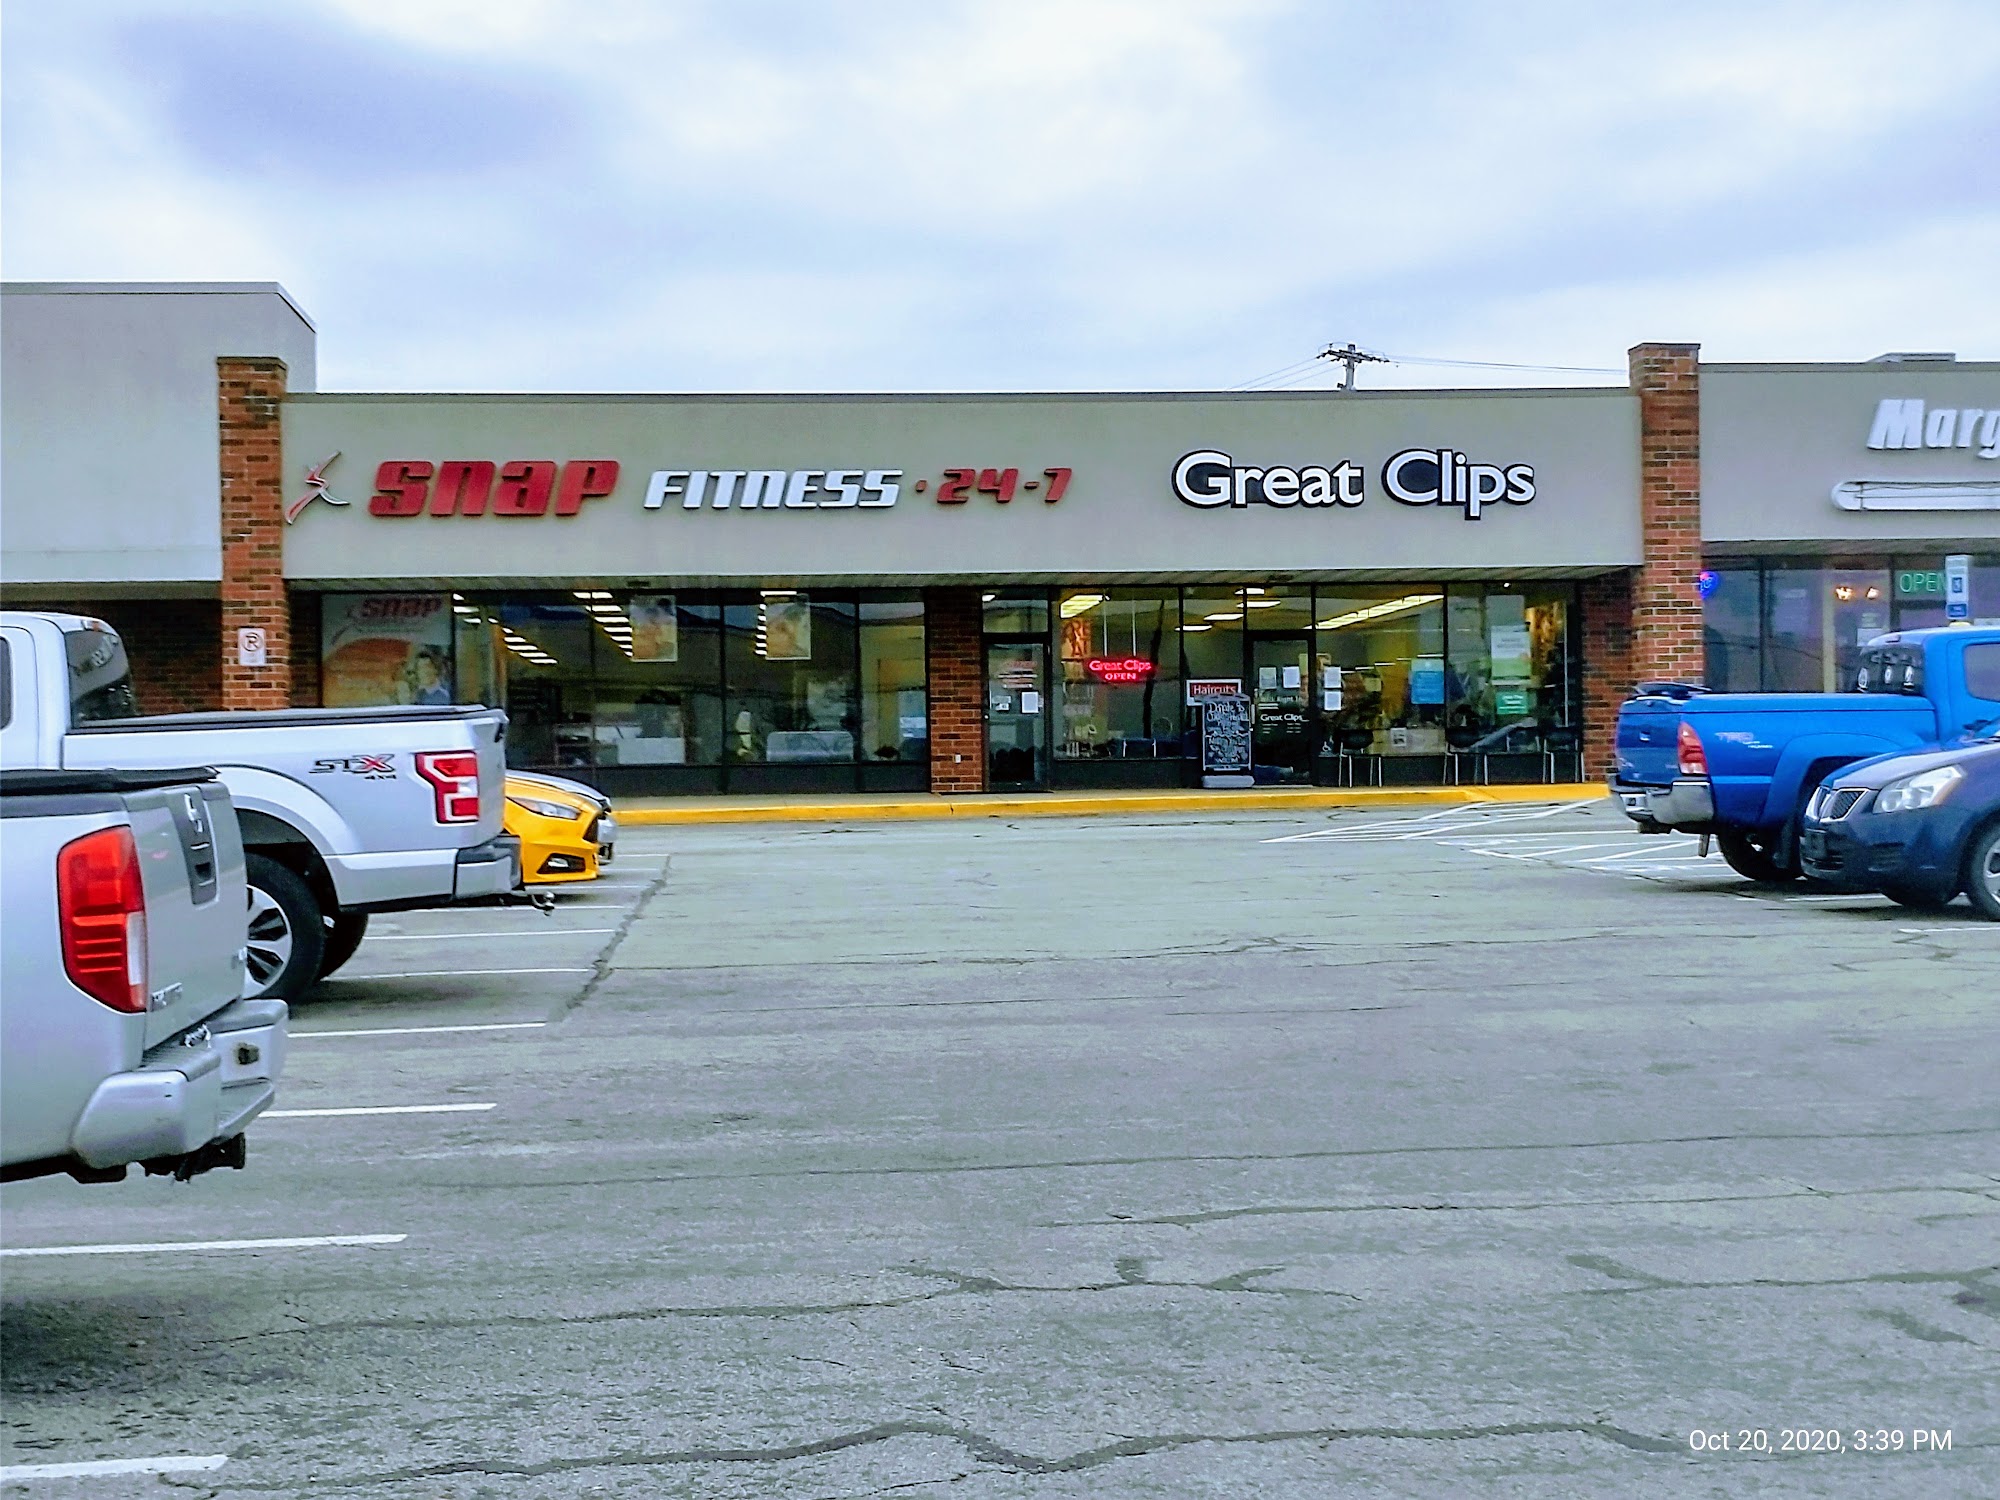 Great Clips 312 Countryside Plaza, Mt Pleasant Pennsylvania 15666